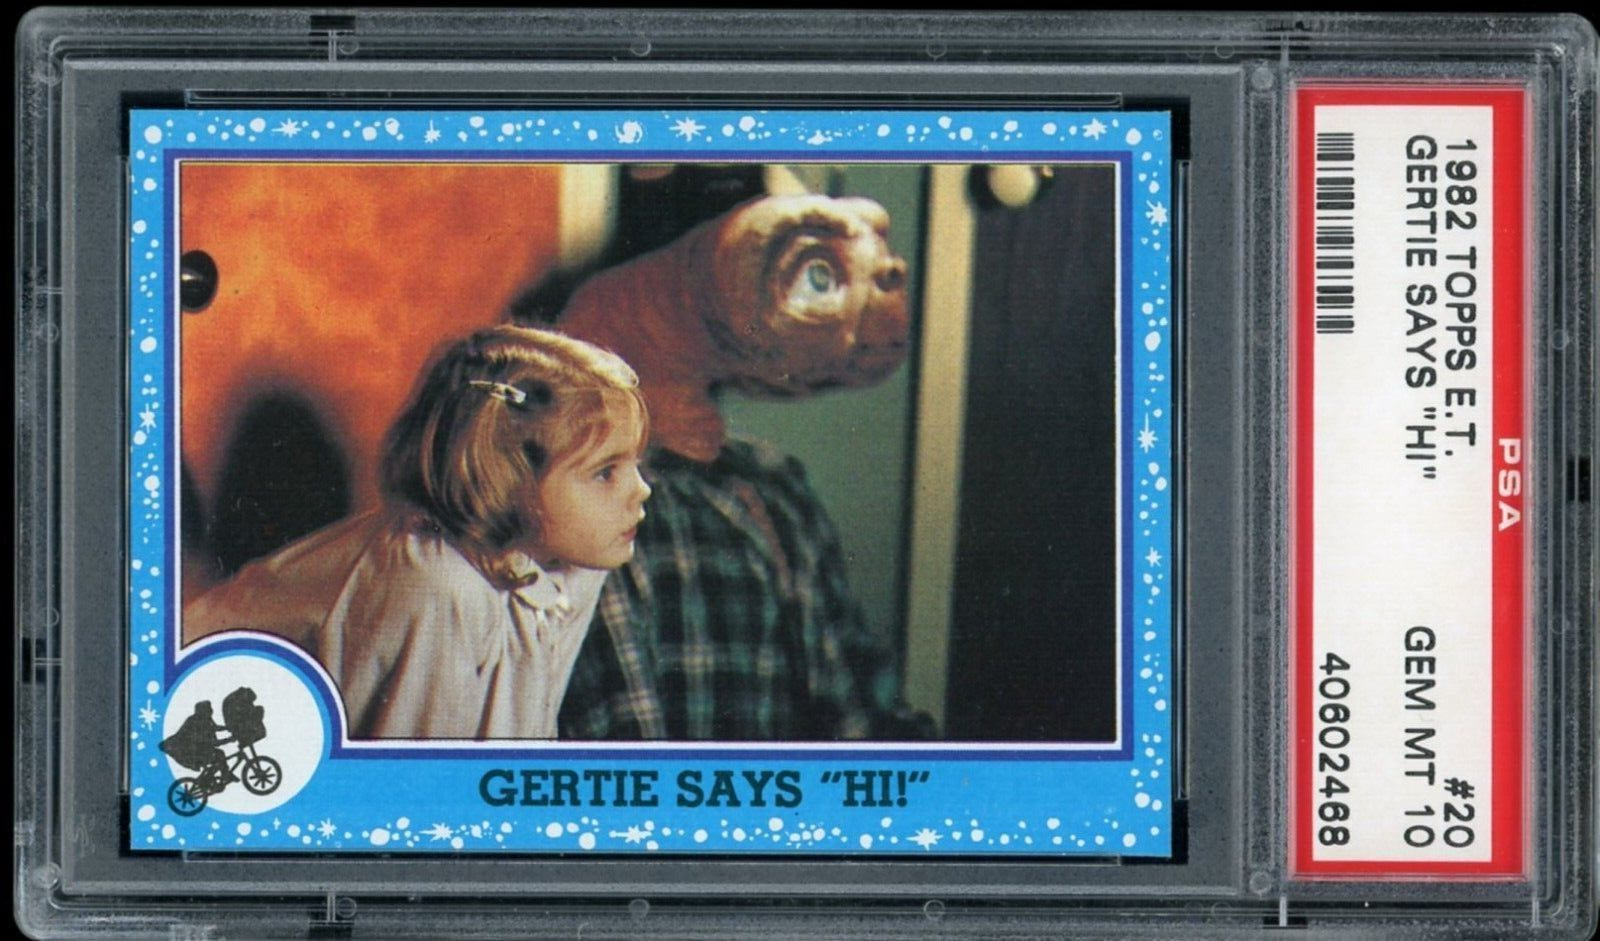 PSA 10 1982 Topps E.T. Drew Barrymore Rookie Card Topps ET The Extra Terrestrial